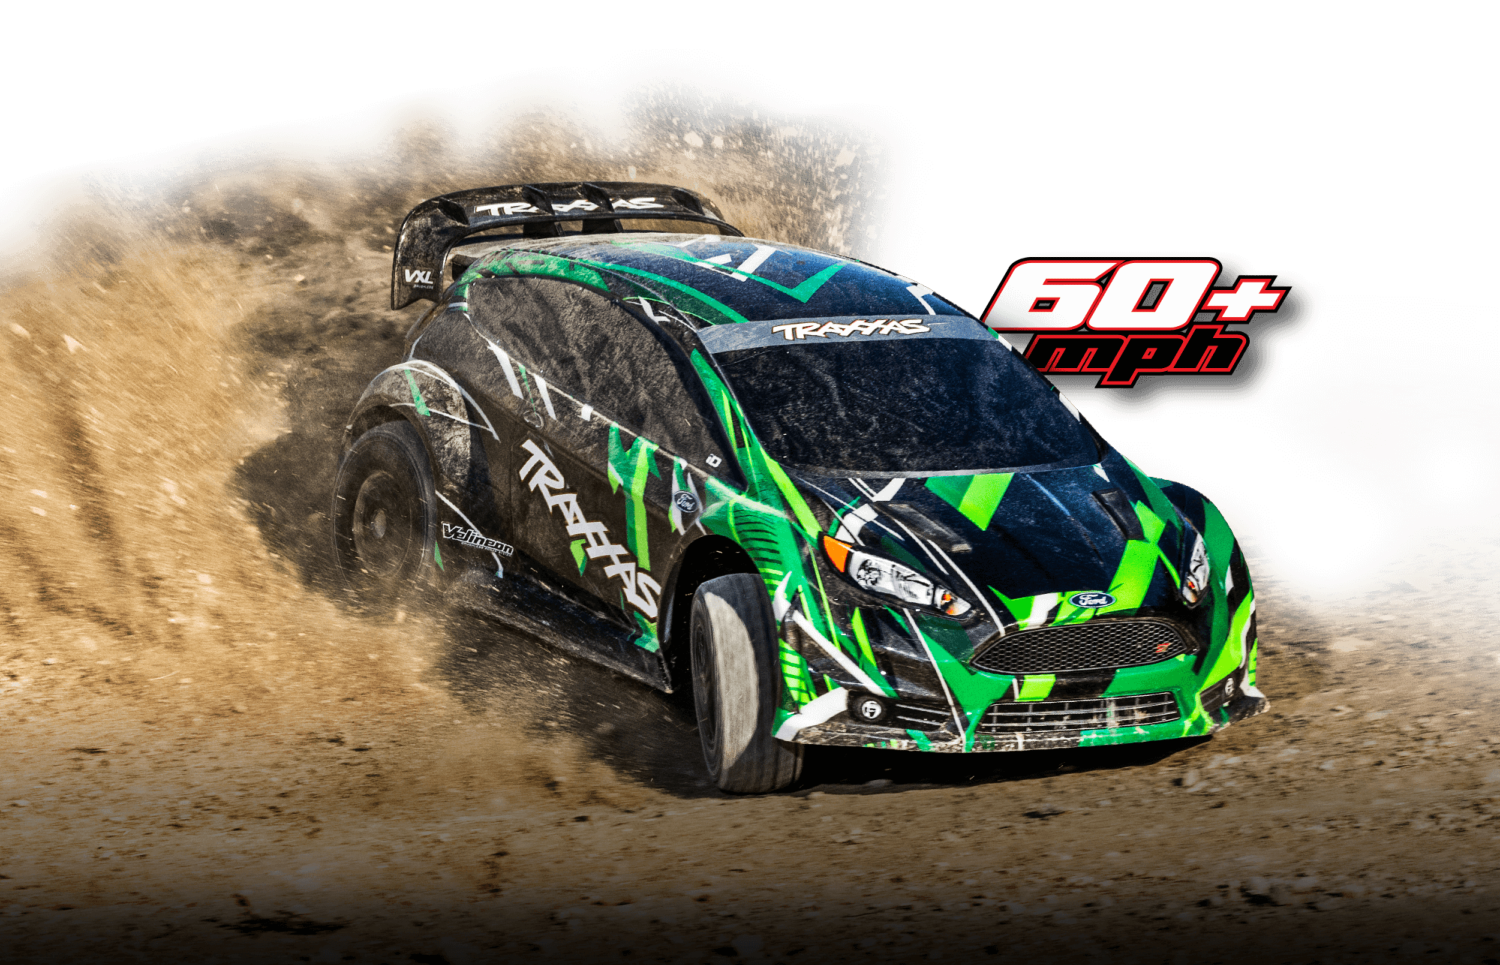 PACK ECO 100% RTR FORD FIESTA RALLY VXL BRUSHLESS CLIPLESS LIPO 3S 4000 MAH CHARGEUR TRAXXAS SAC OFFERT